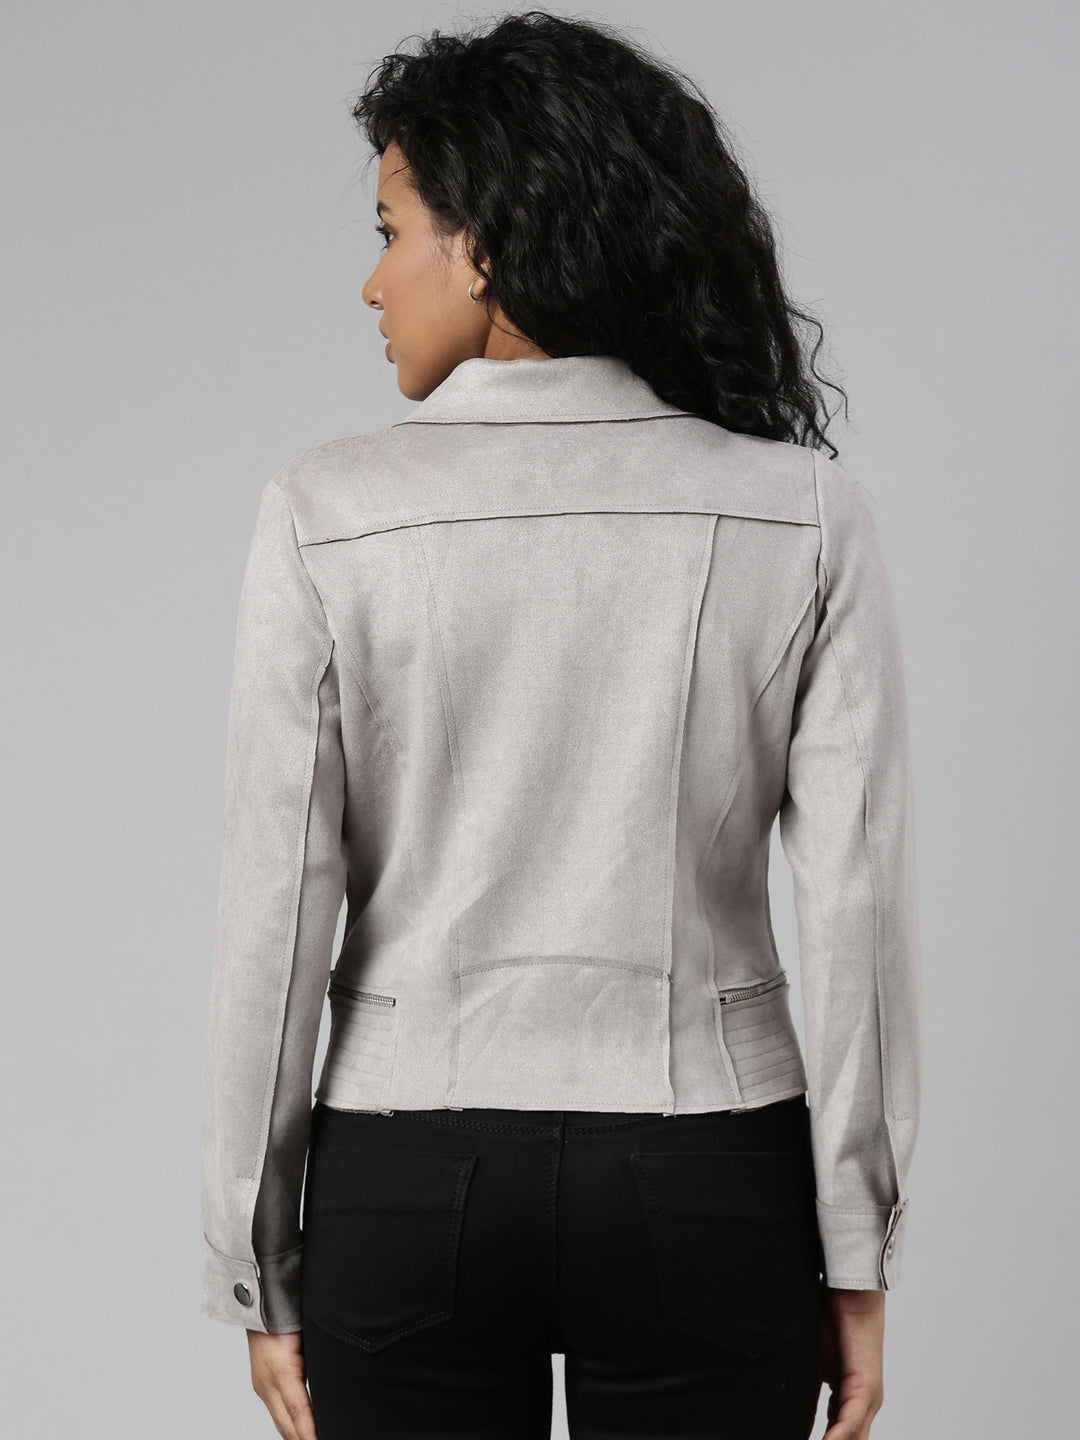 Women Grey Solid Tailored Jacket